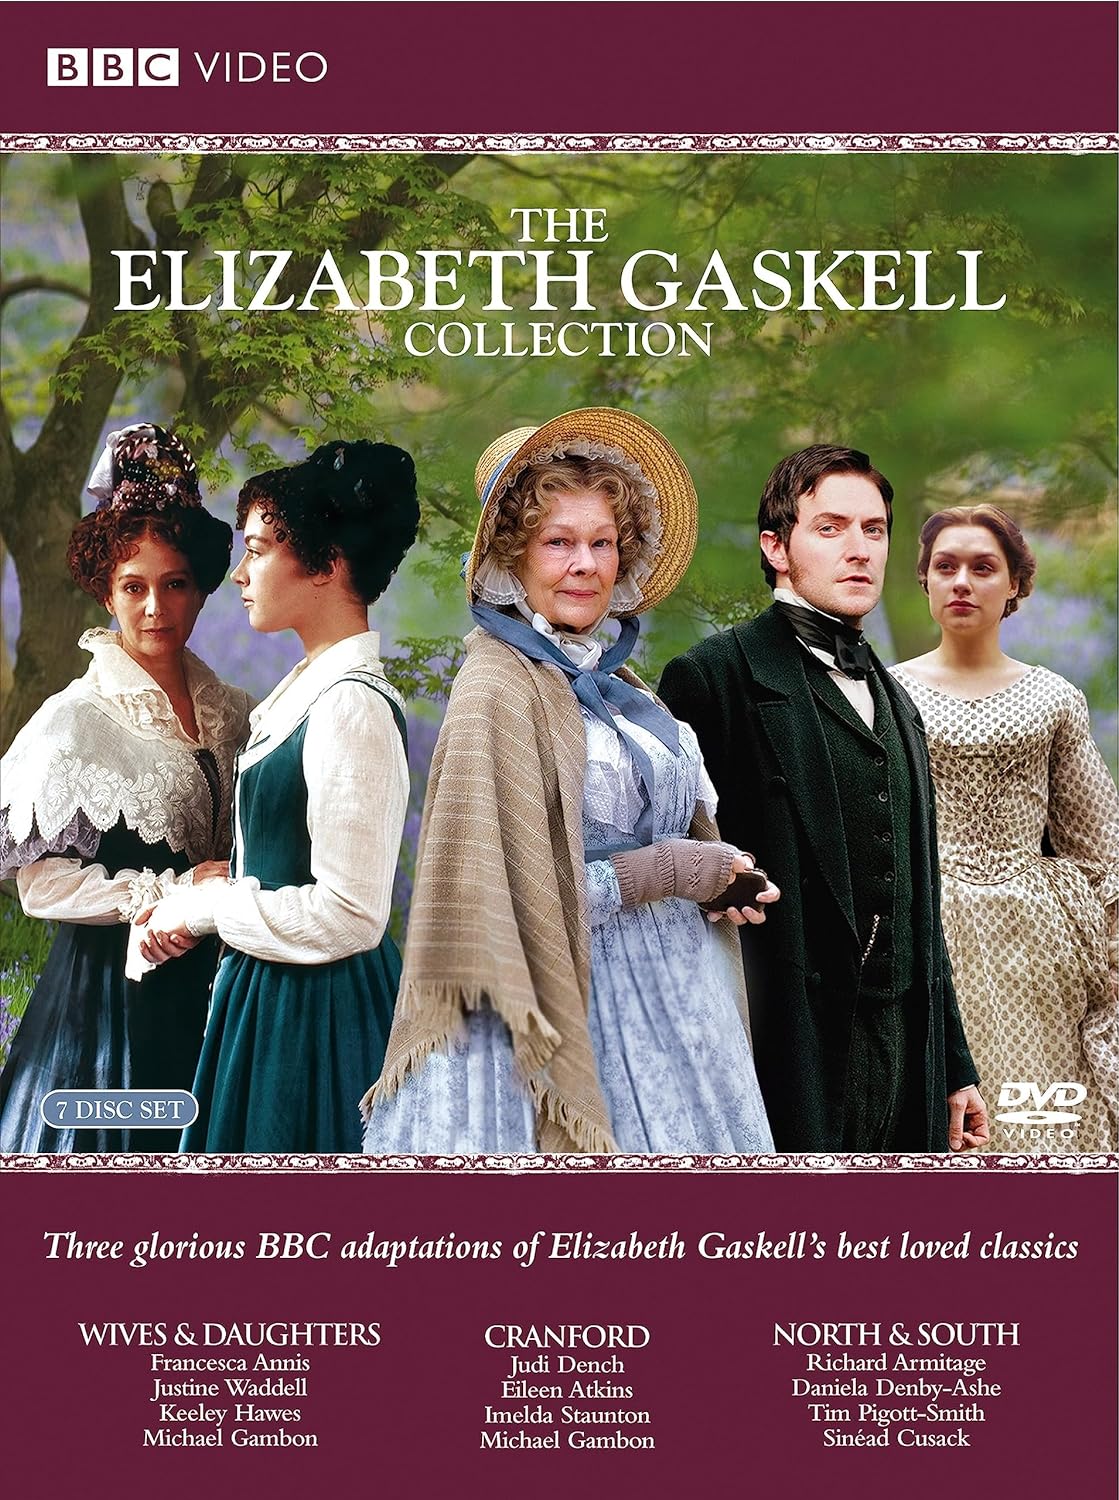 The Elizabeth Gaskell Collection (2008, DVD)